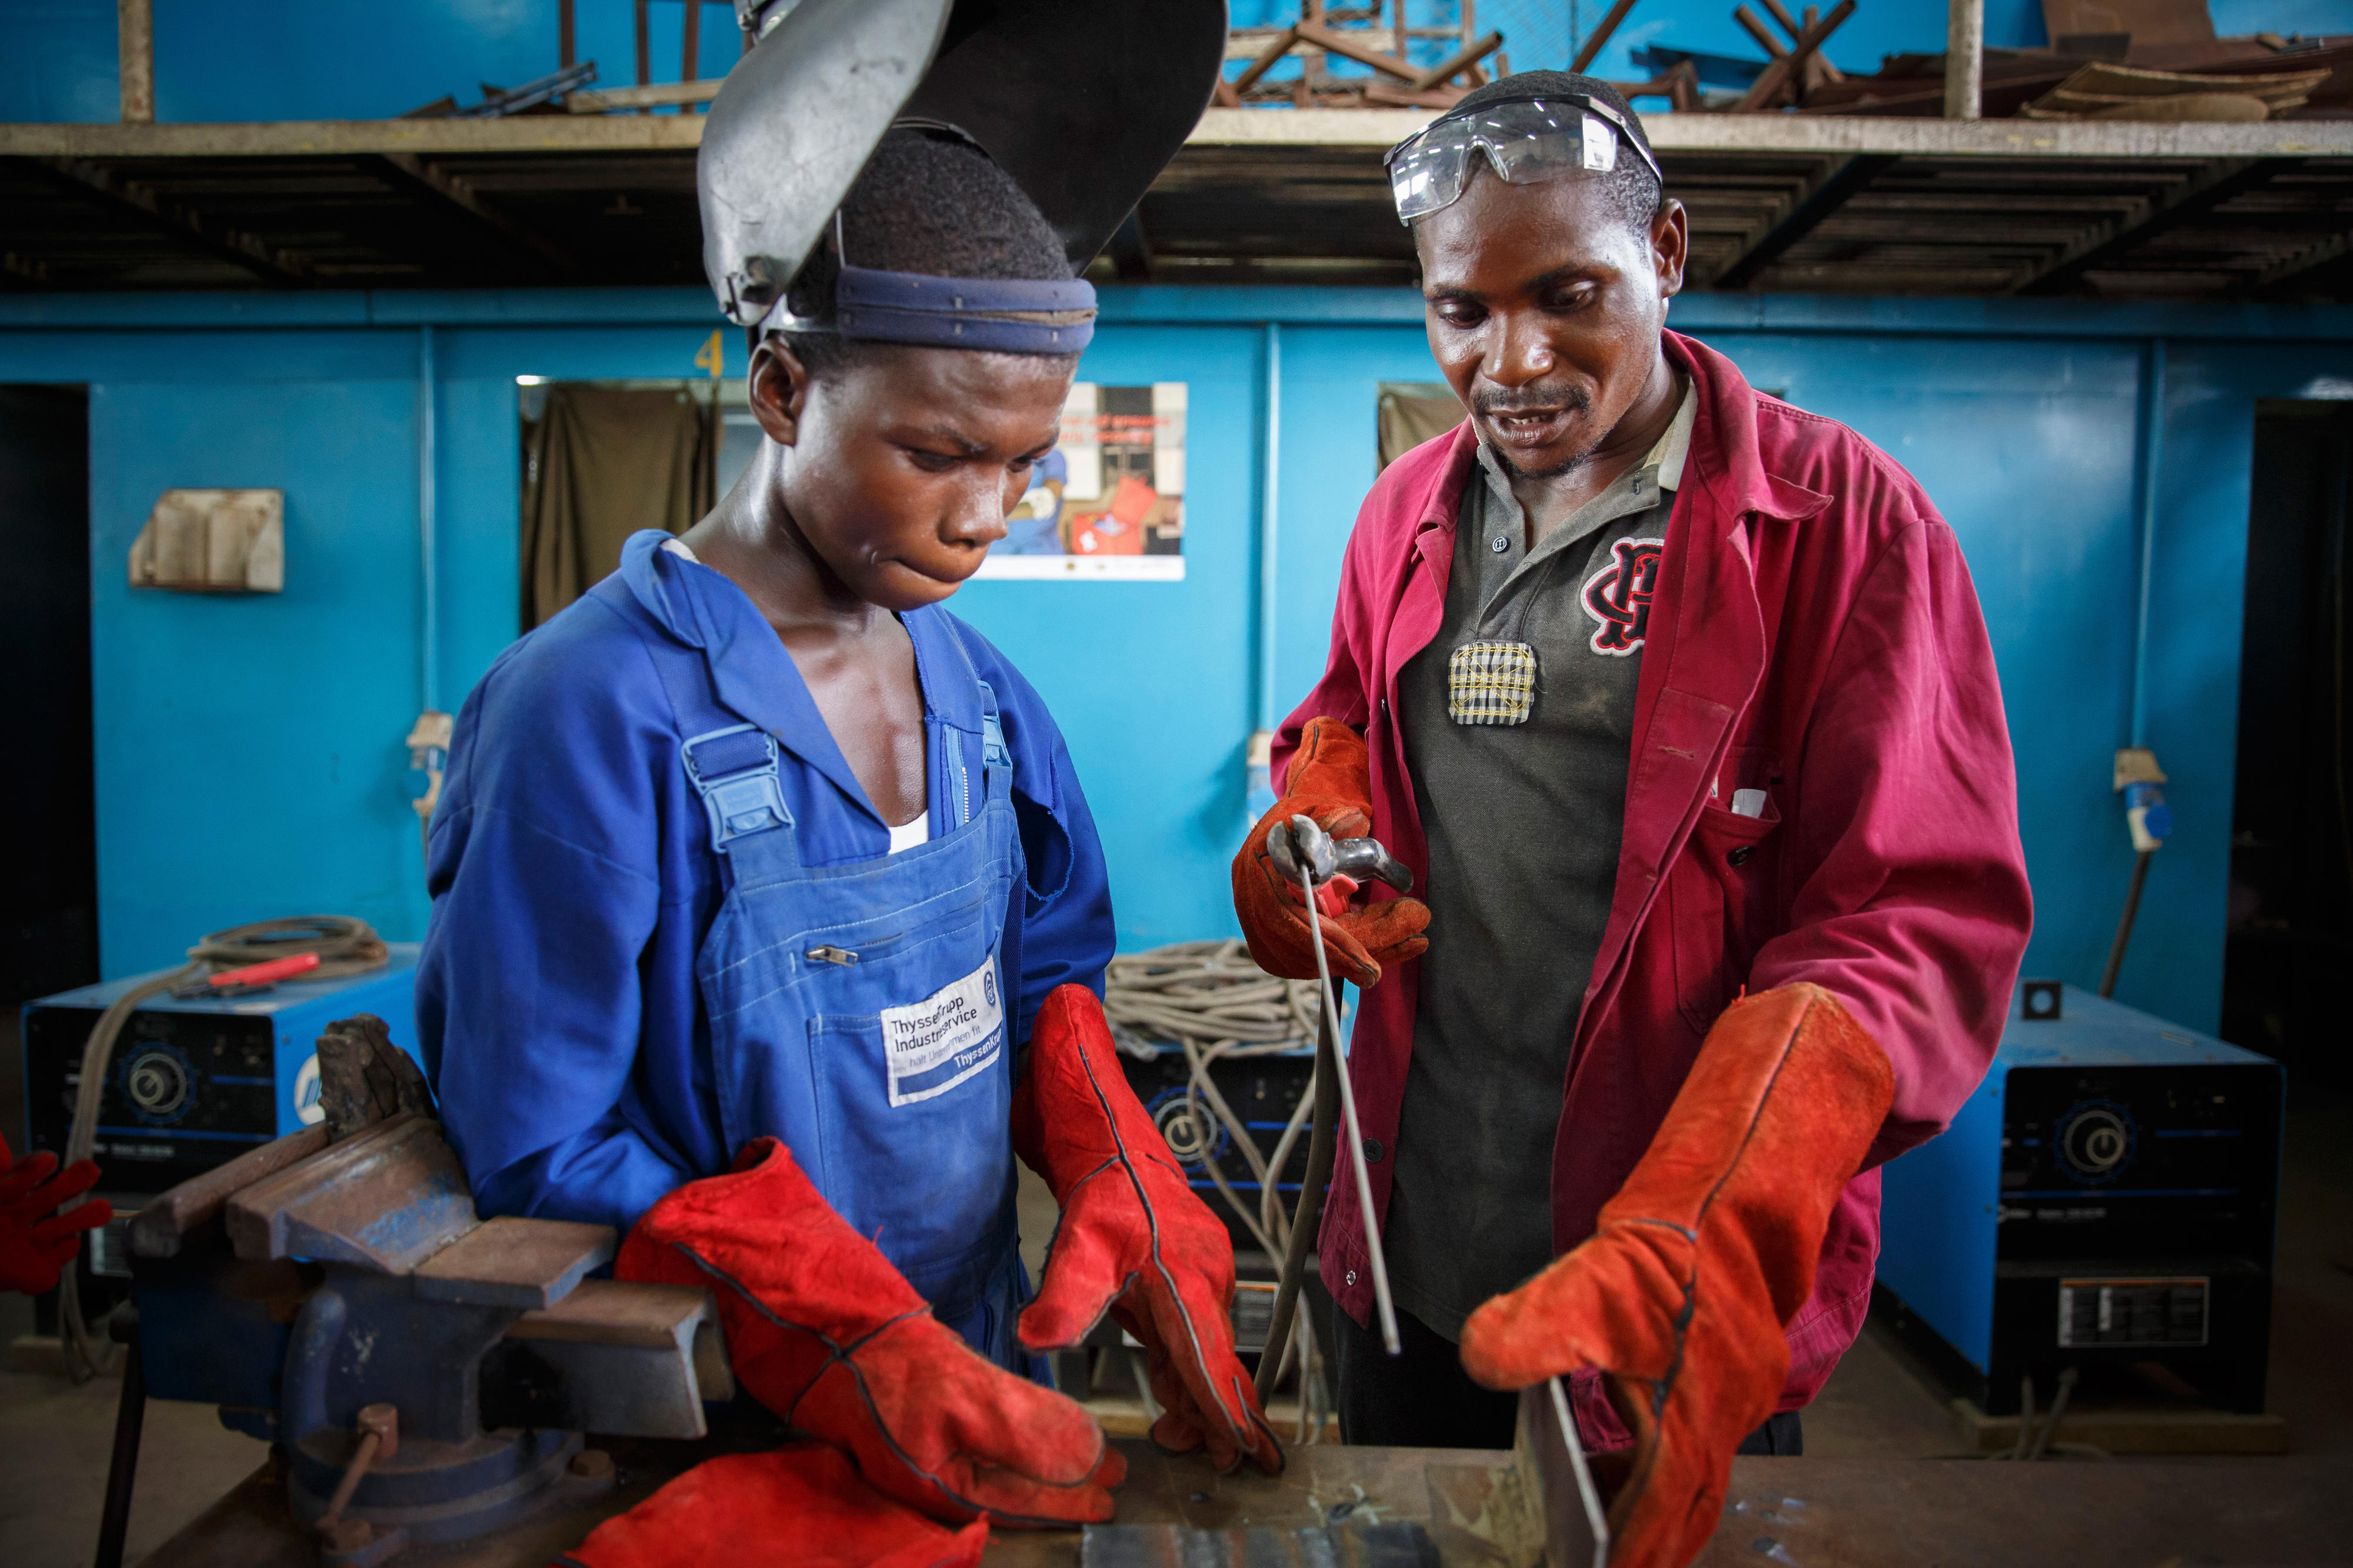 Students in the metal workshop of a vocational training institution in Accra, Ghana